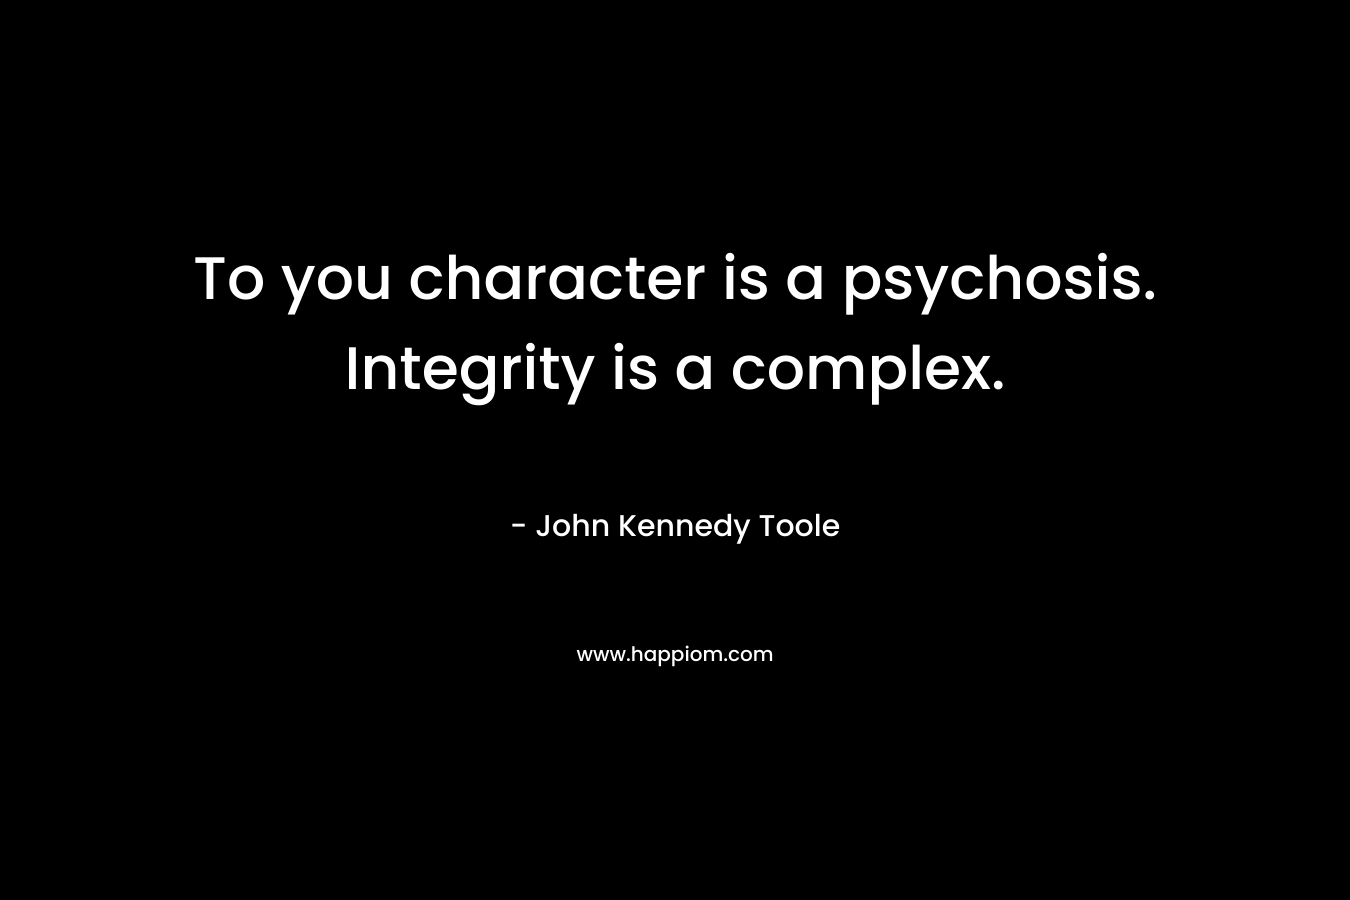 To you character is a psychosis. Integrity is a complex.